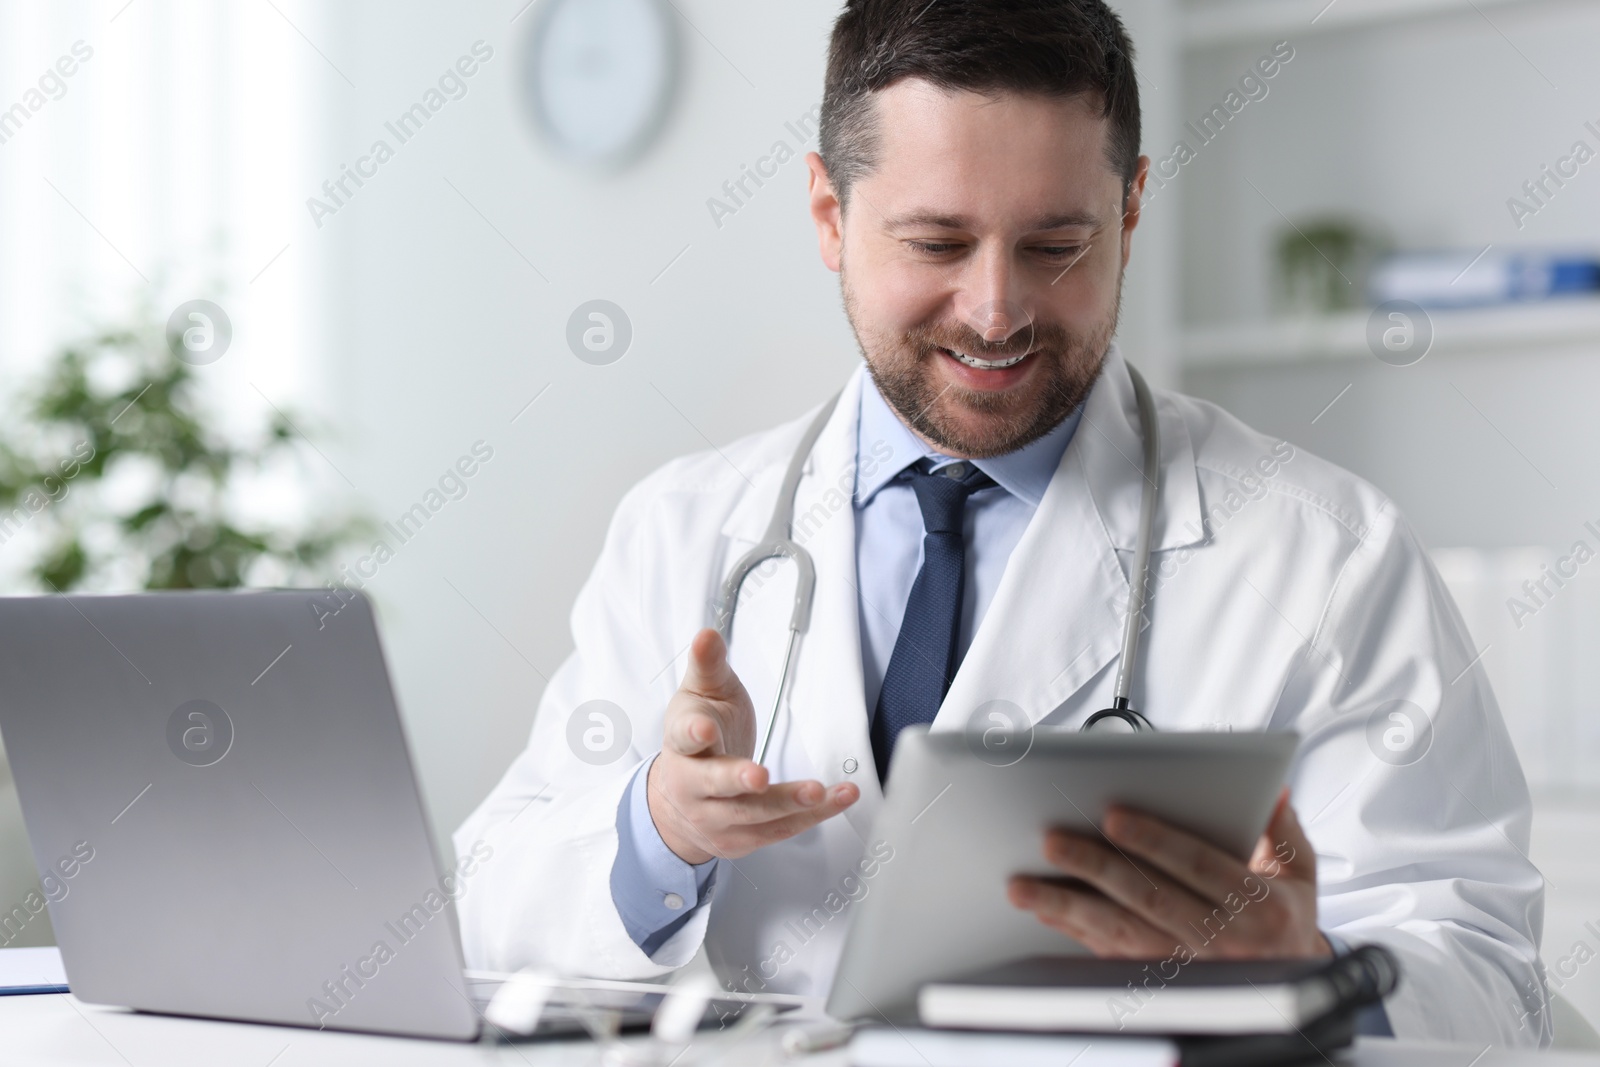 Photo of Smiling doctor having online consultation via tablet at table in clinic